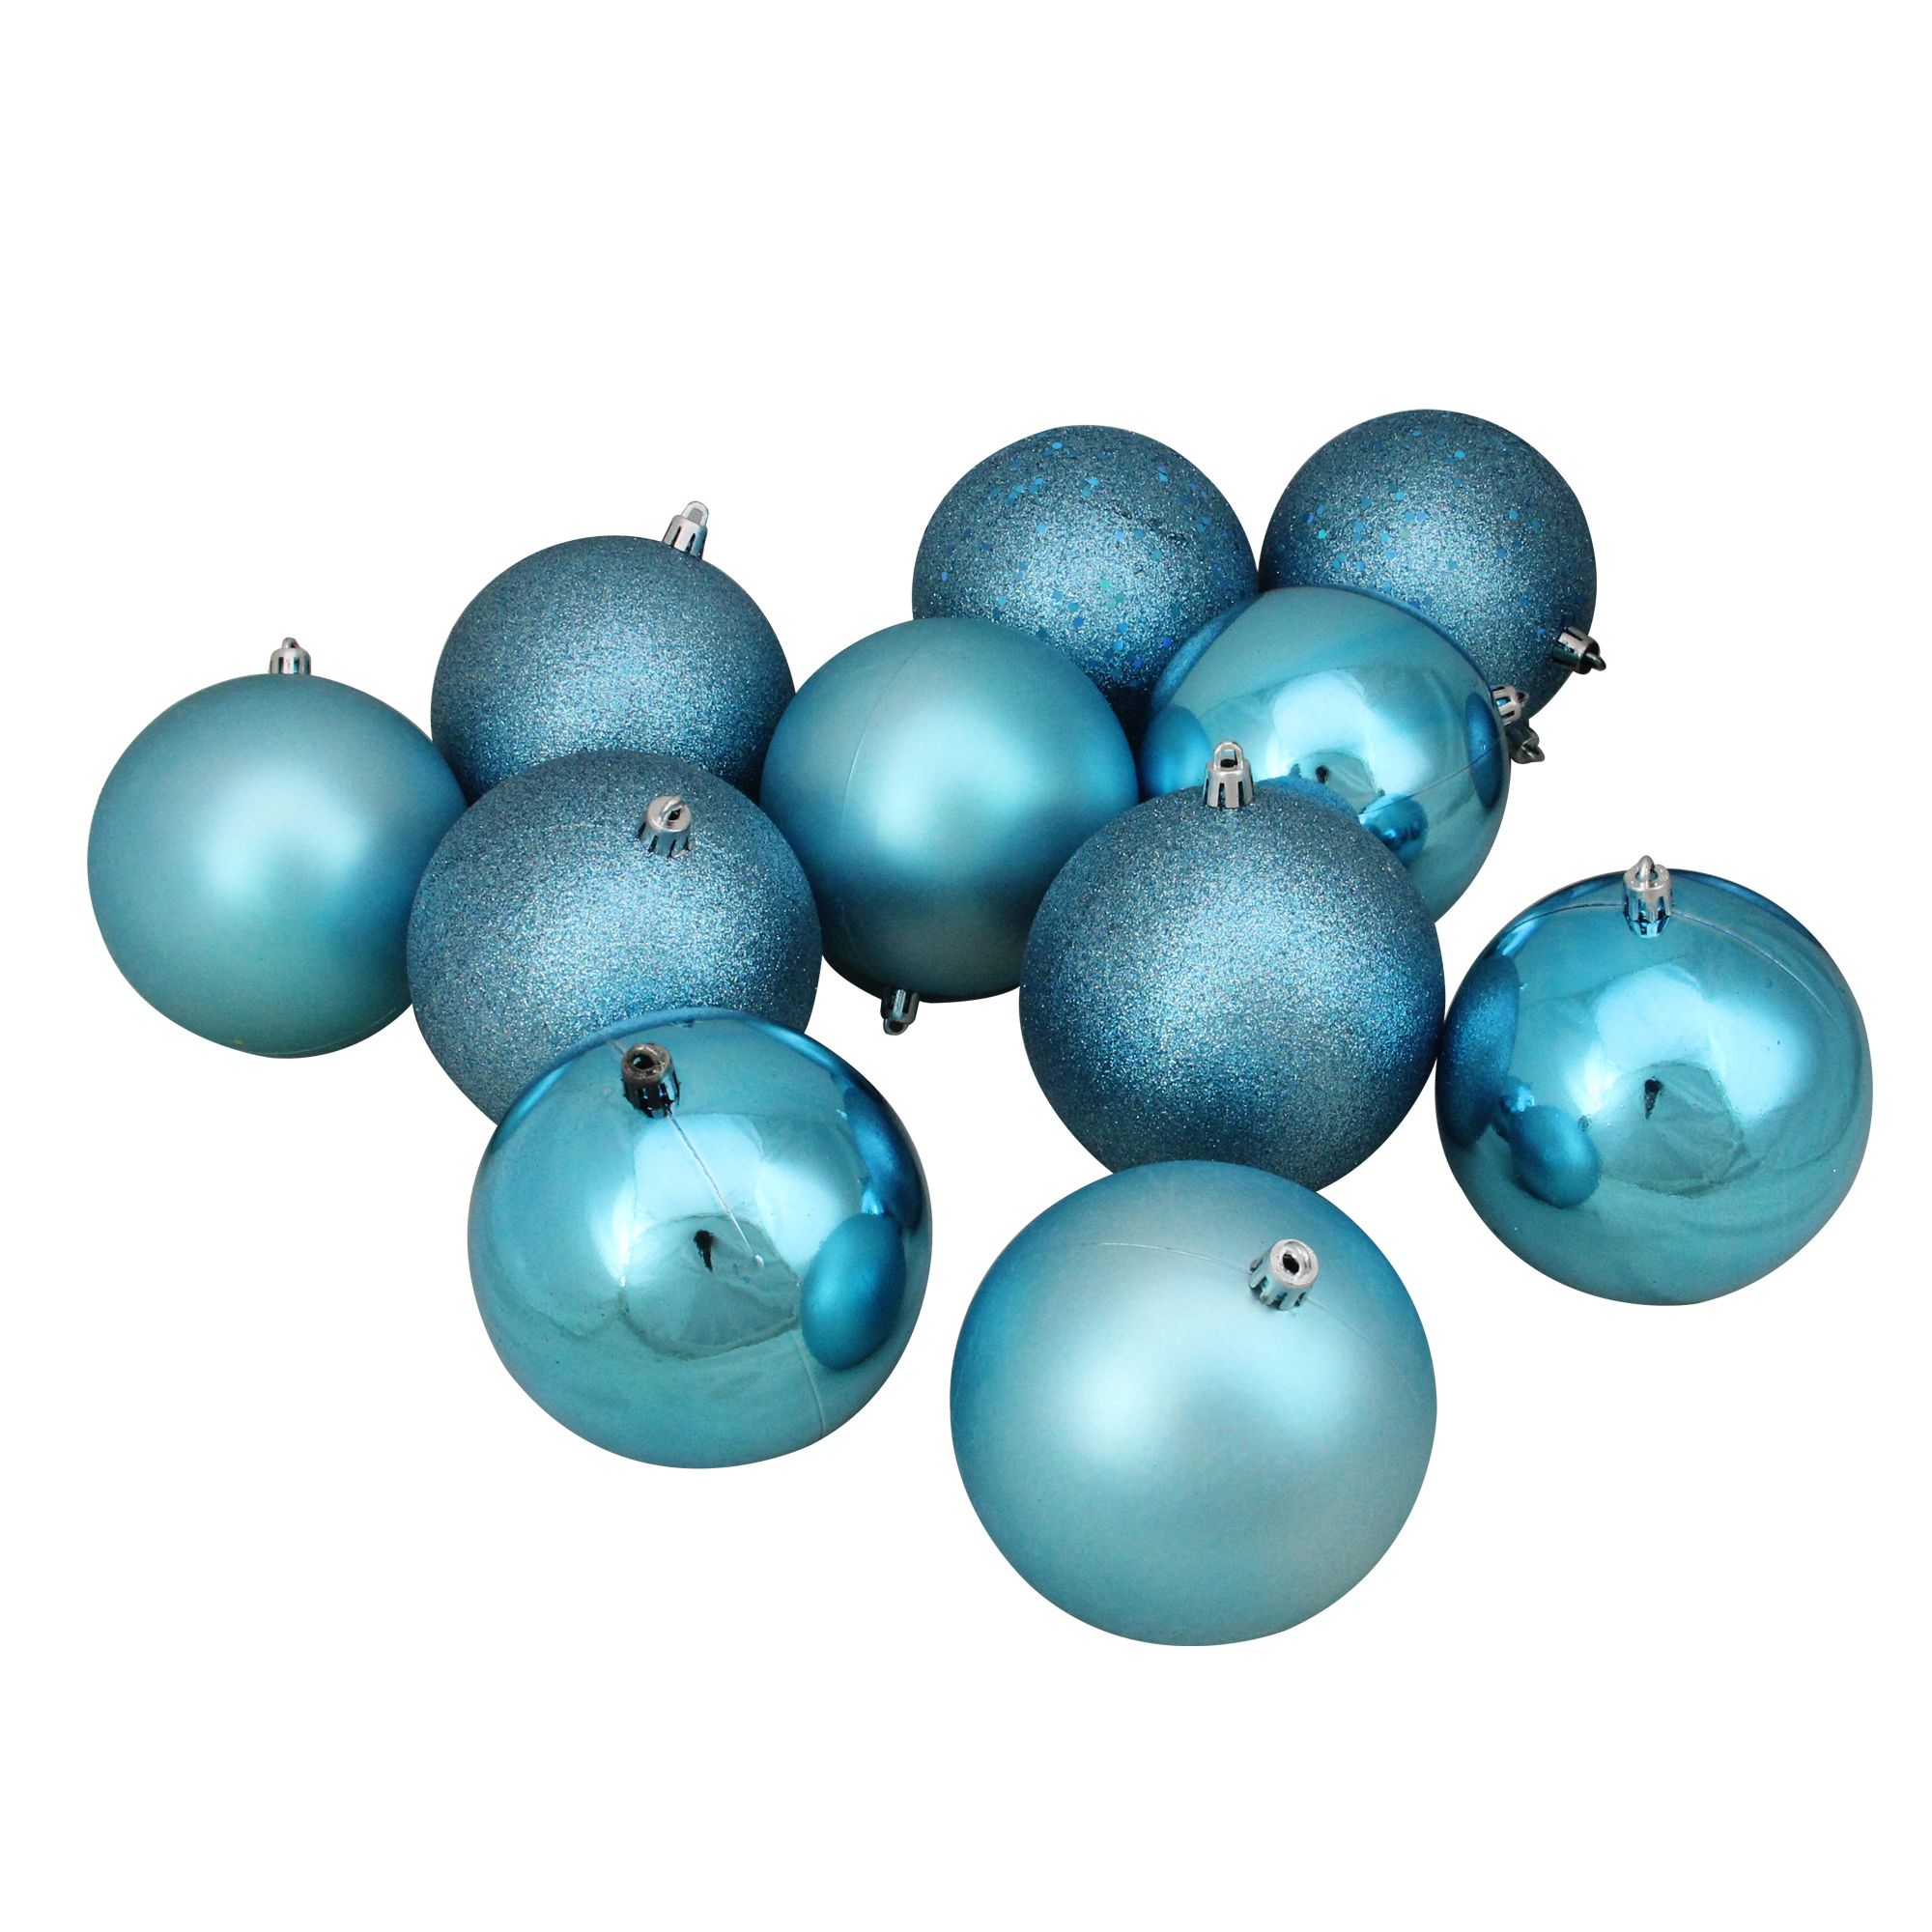 Northlight Shatterproof 4-Finish 4&quot; Christmas Ball Ornaments, 12 ct. - Turquoise Blue